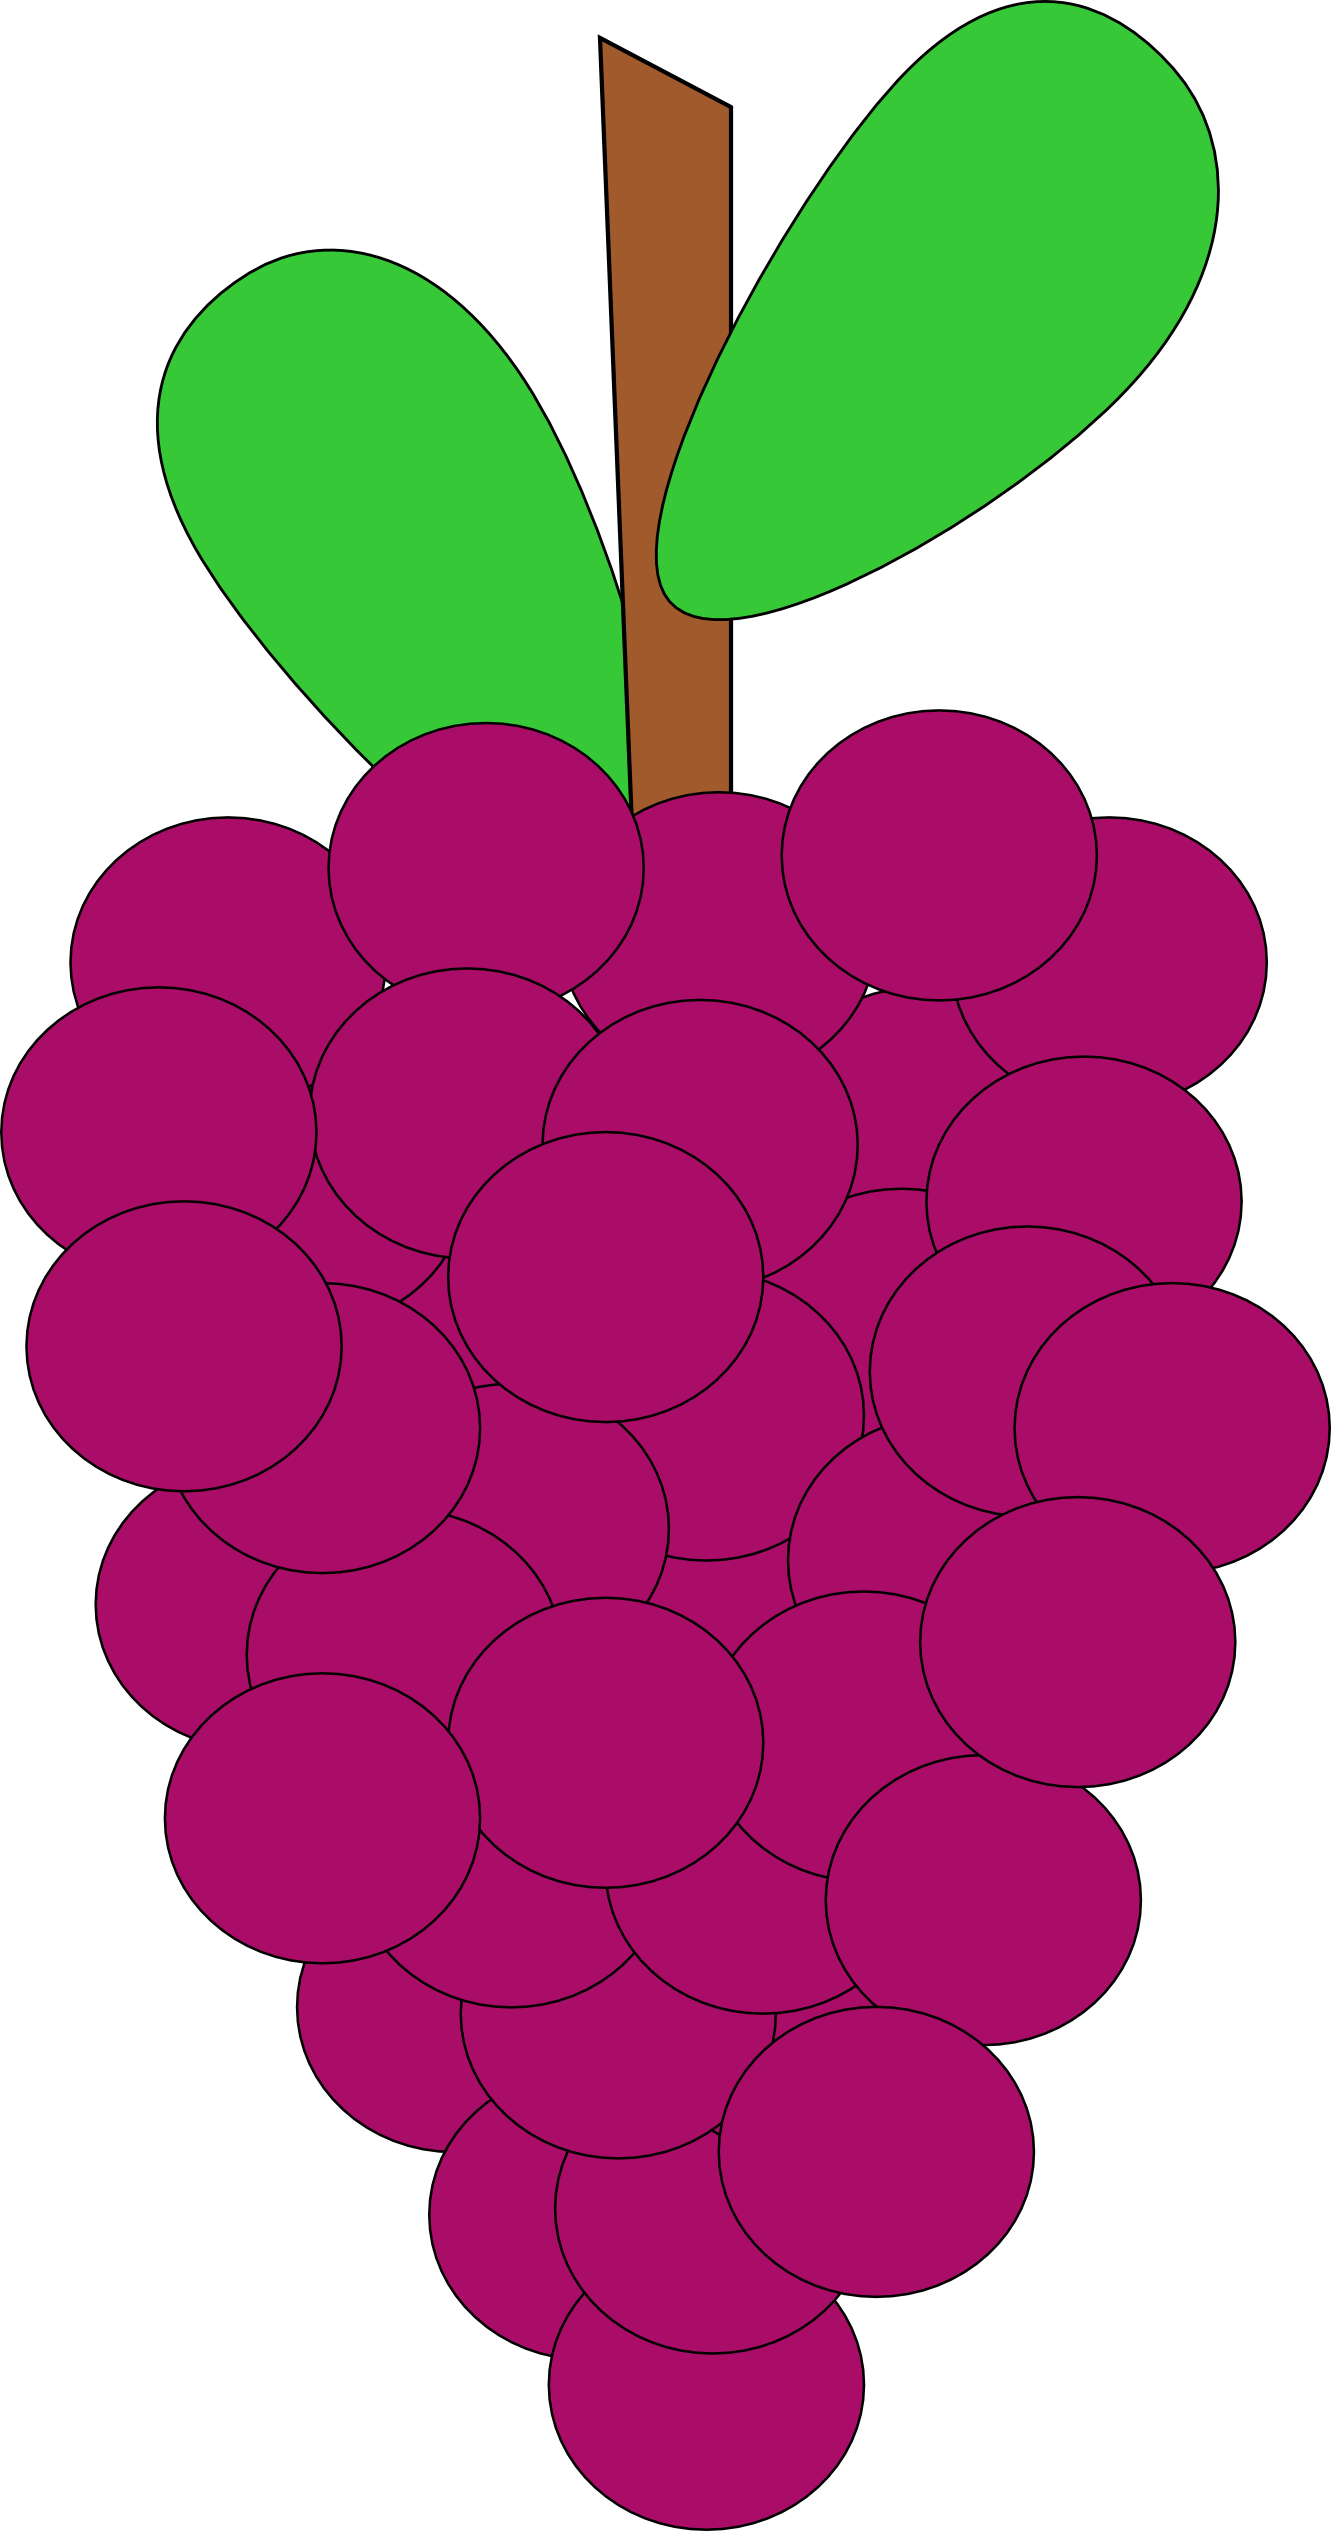 Grapes Clipart Grape Fruit Clip Art Downloadclipart - Animated Picture Of Grape (1331x2531)